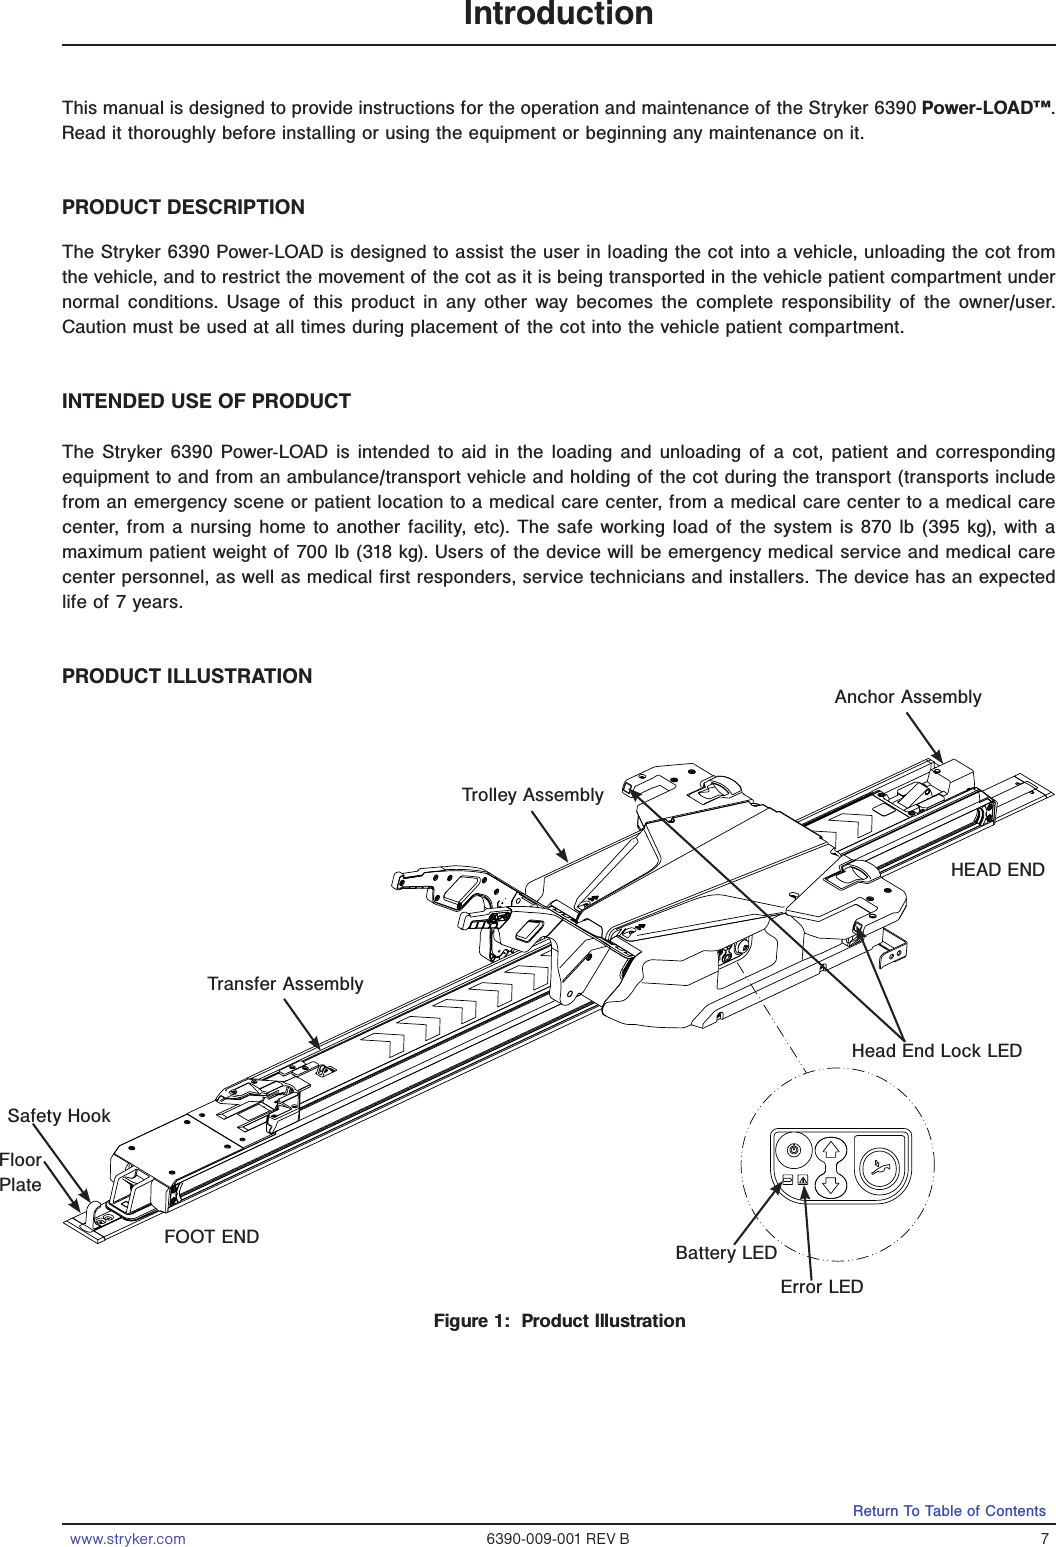 www.stryker.com 6390-009-001 REV B 7Return To Table of ContentsIntroductionThis manual is designed to provide instructions for the operation and maintenance of the Stryker 6390 Power-LOAD™. Read it thoroughly before installing or using the equipment or beginning any maintenance on it. PRODUCT DESCRIPTIONThe Stryker 6390 Power-LOAD is designed to assist the user in loading the cot into a vehicle, unloading the cot from the vehicle, and to restrict the movement of the cot as it is being transported in the vehicle patient compartment under normal conditions. Usage of this product in any other way becomes the complete responsibility of the owner/user.  Caution must be used at all times during placement of the cot into the vehicle patient compartment.INTENDED USE OF PRODUCTThe Stryker 6390 Power-LOAD is intended to aid in the loading and unloading of a cot, patient and corresponding equipment to and from an ambulance/transport vehicle and holding of the cot during the transport (transports include from an emergency scene or patient location to a medical care center, from a medical care center to a medical care center, from a nursing home to another facility, etc). The safe working load of the system is 870 lb (395 kg), with a maximum patient weight of 700 lb (318 kg). Users of the device will be emergency medical service and medical care center personnel, as well as medical first responders, service technicians and installers. The device has an expected life of 7 years.PRODUCT ILLUSTRATIONTrolley AssemblyTransfer AssemblyAnchor AssemblyFloor PlateHead End Lock LEDError LEDBattery LEDFOOT ENDHEAD ENDFigure 1:  Product IllustrationSafety Hook